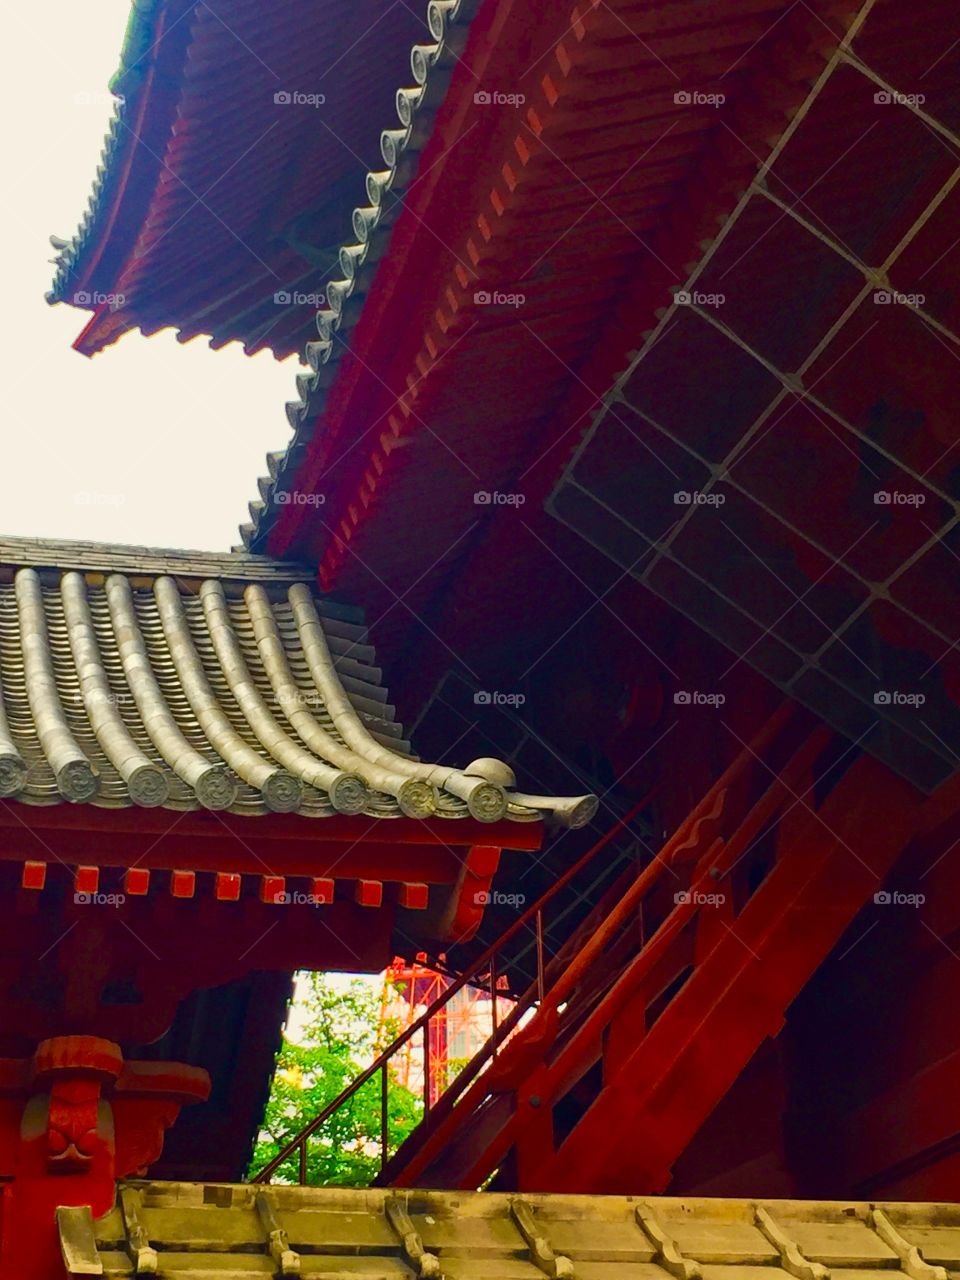 Angles.  The Chief Temple of Jodo. Tokyo, Japan